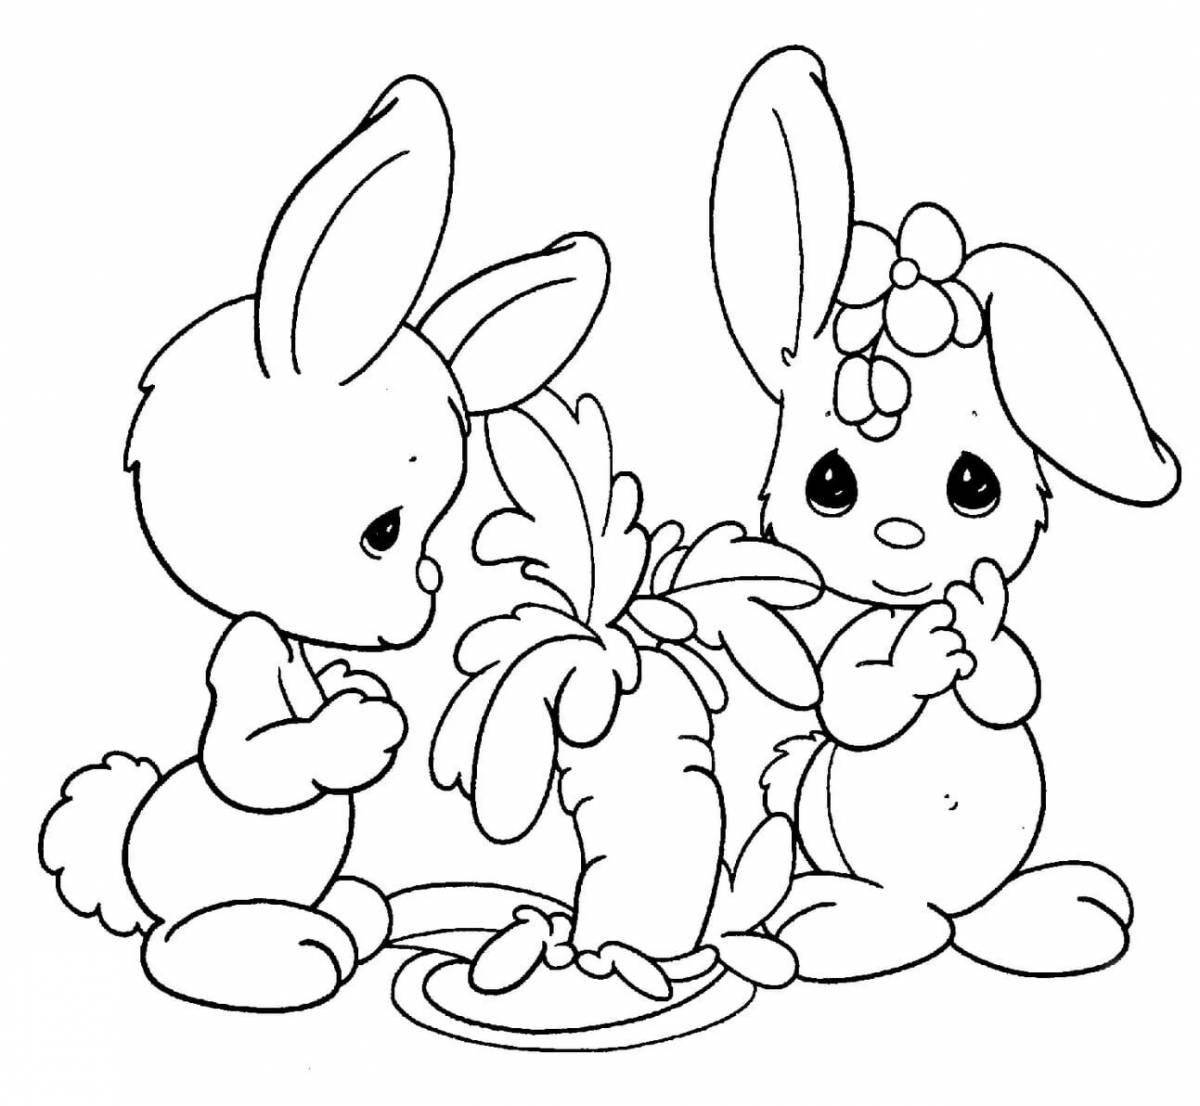 Violent hare coloring book